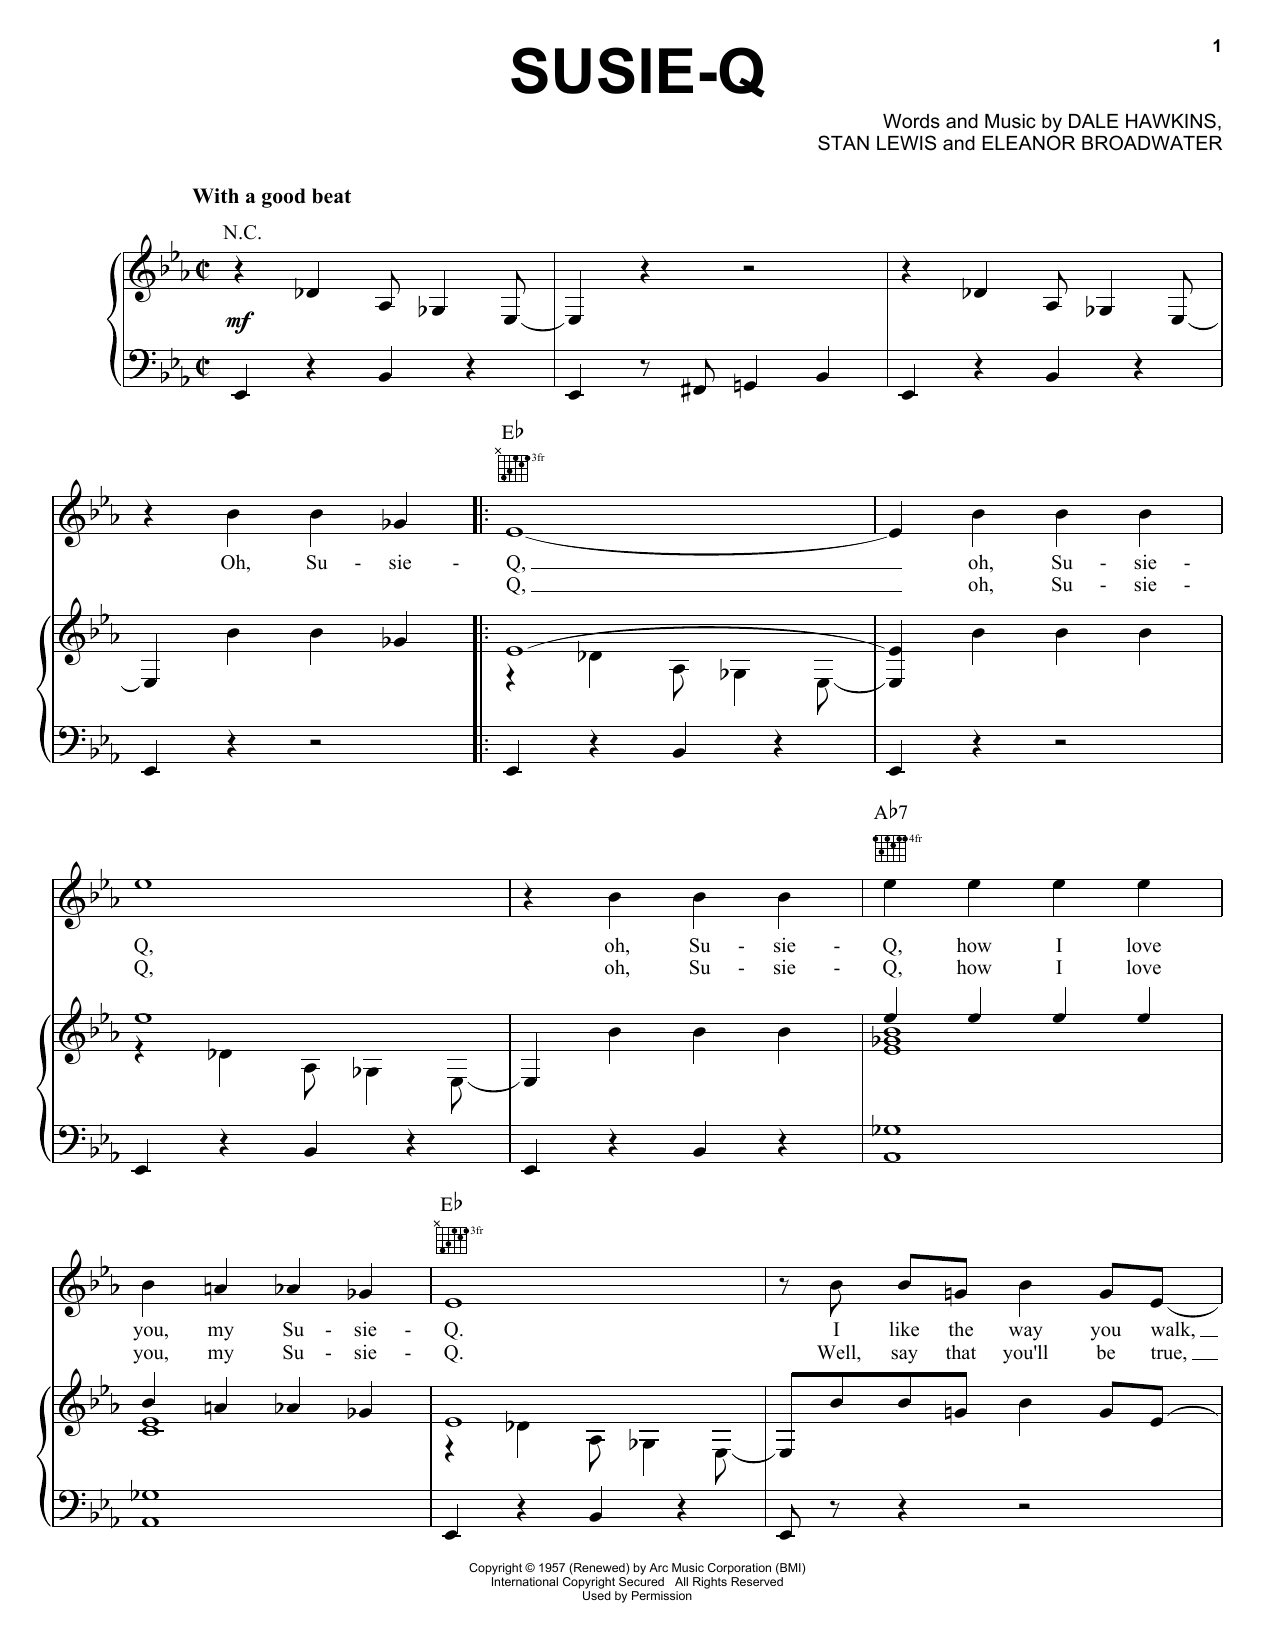 Download Creedence Clearwater Revival Susie-Q Sheet Music